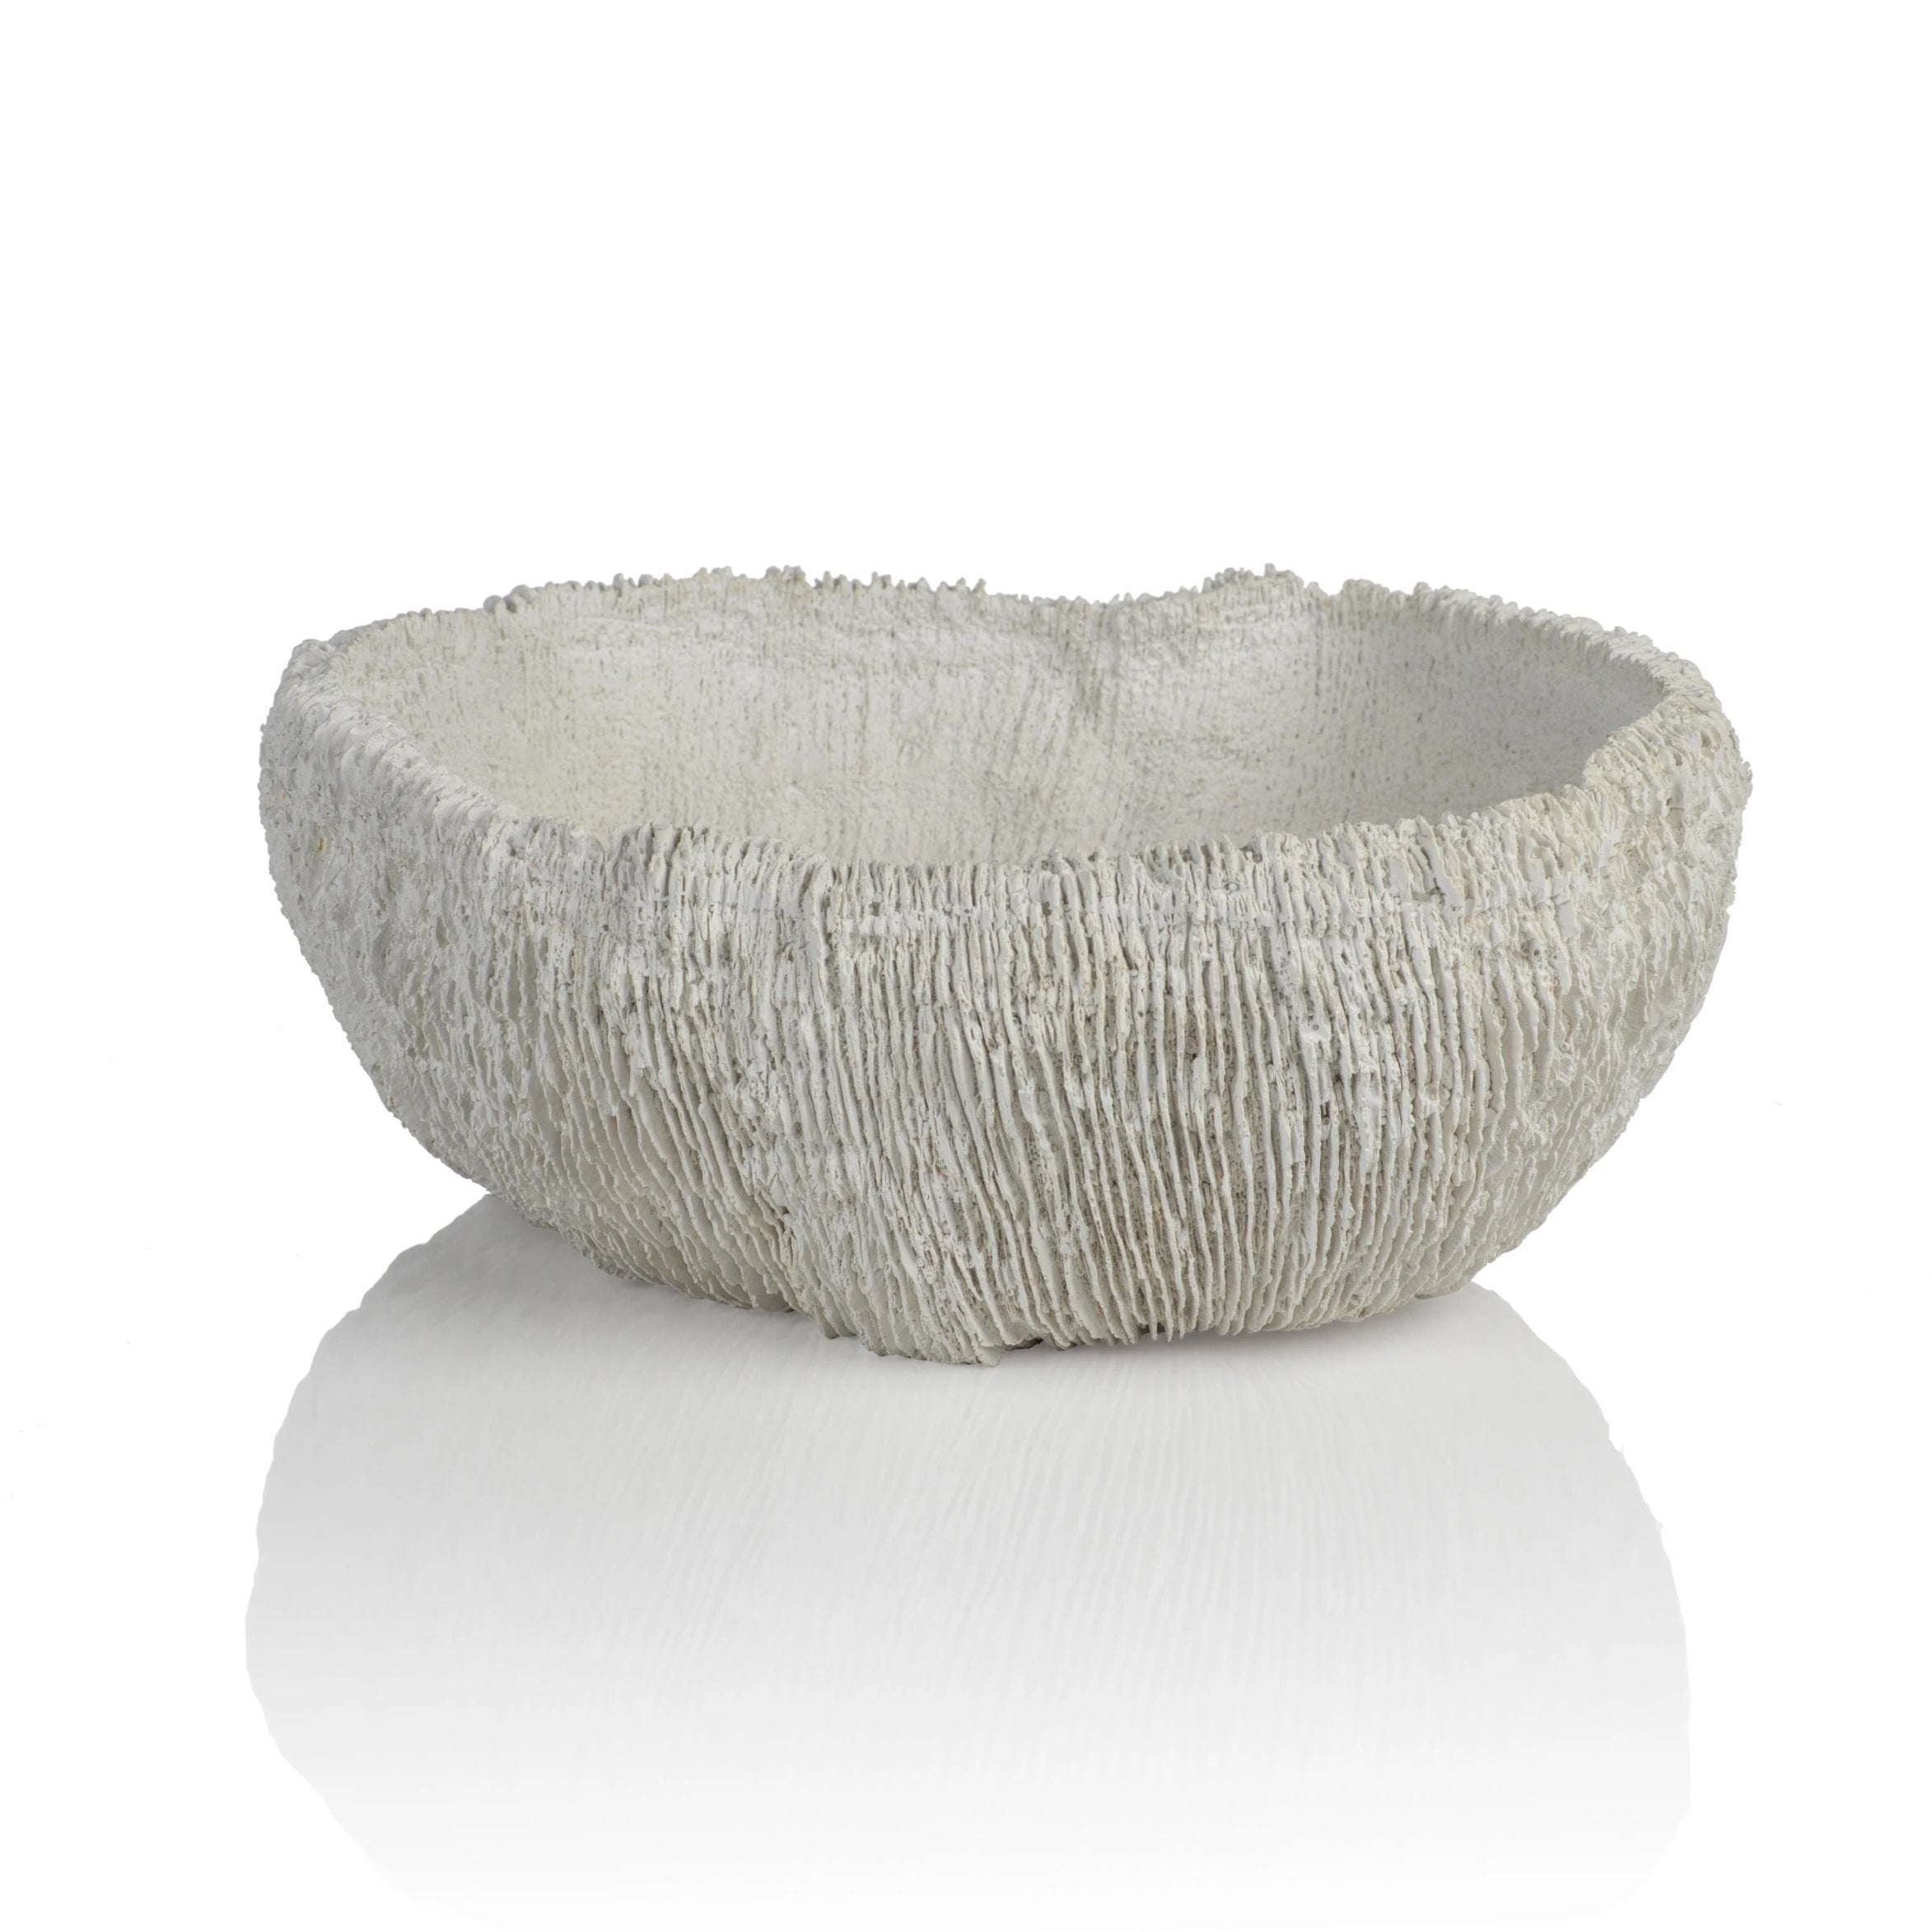 Seychelles Coral Bowl - CARLYLE AVENUE